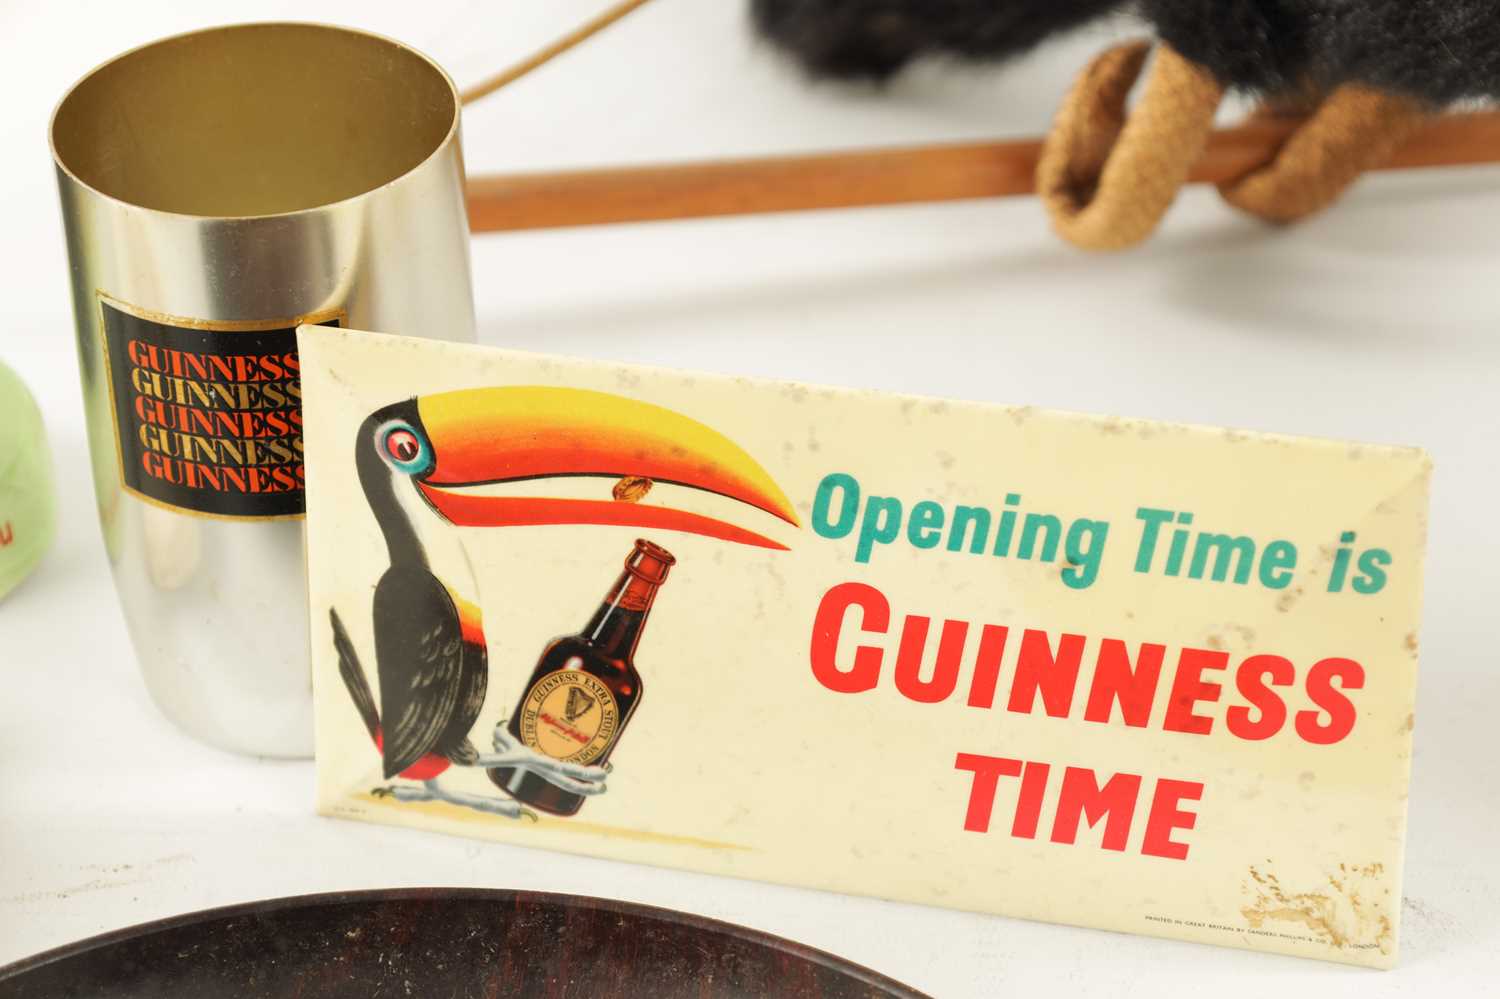 A CARLTON GUINNESS ADVERTISING TABLE LAMP, A GUINNESS ASHTRAY AND VARIOUS OTHER RELATED ITEMS - Image 4 of 6